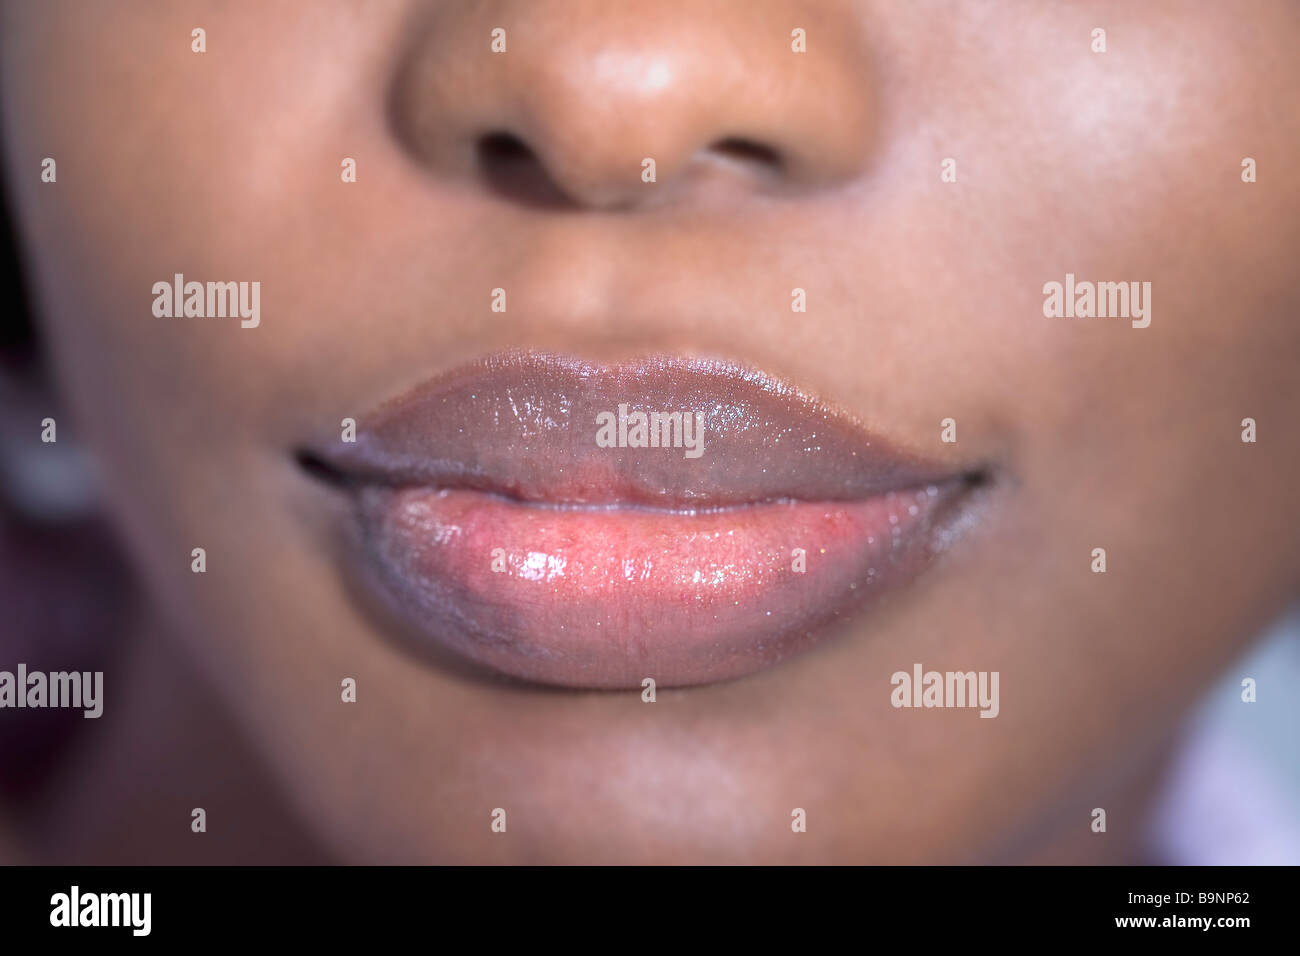 close-up of lips of young black woman Stock Photo